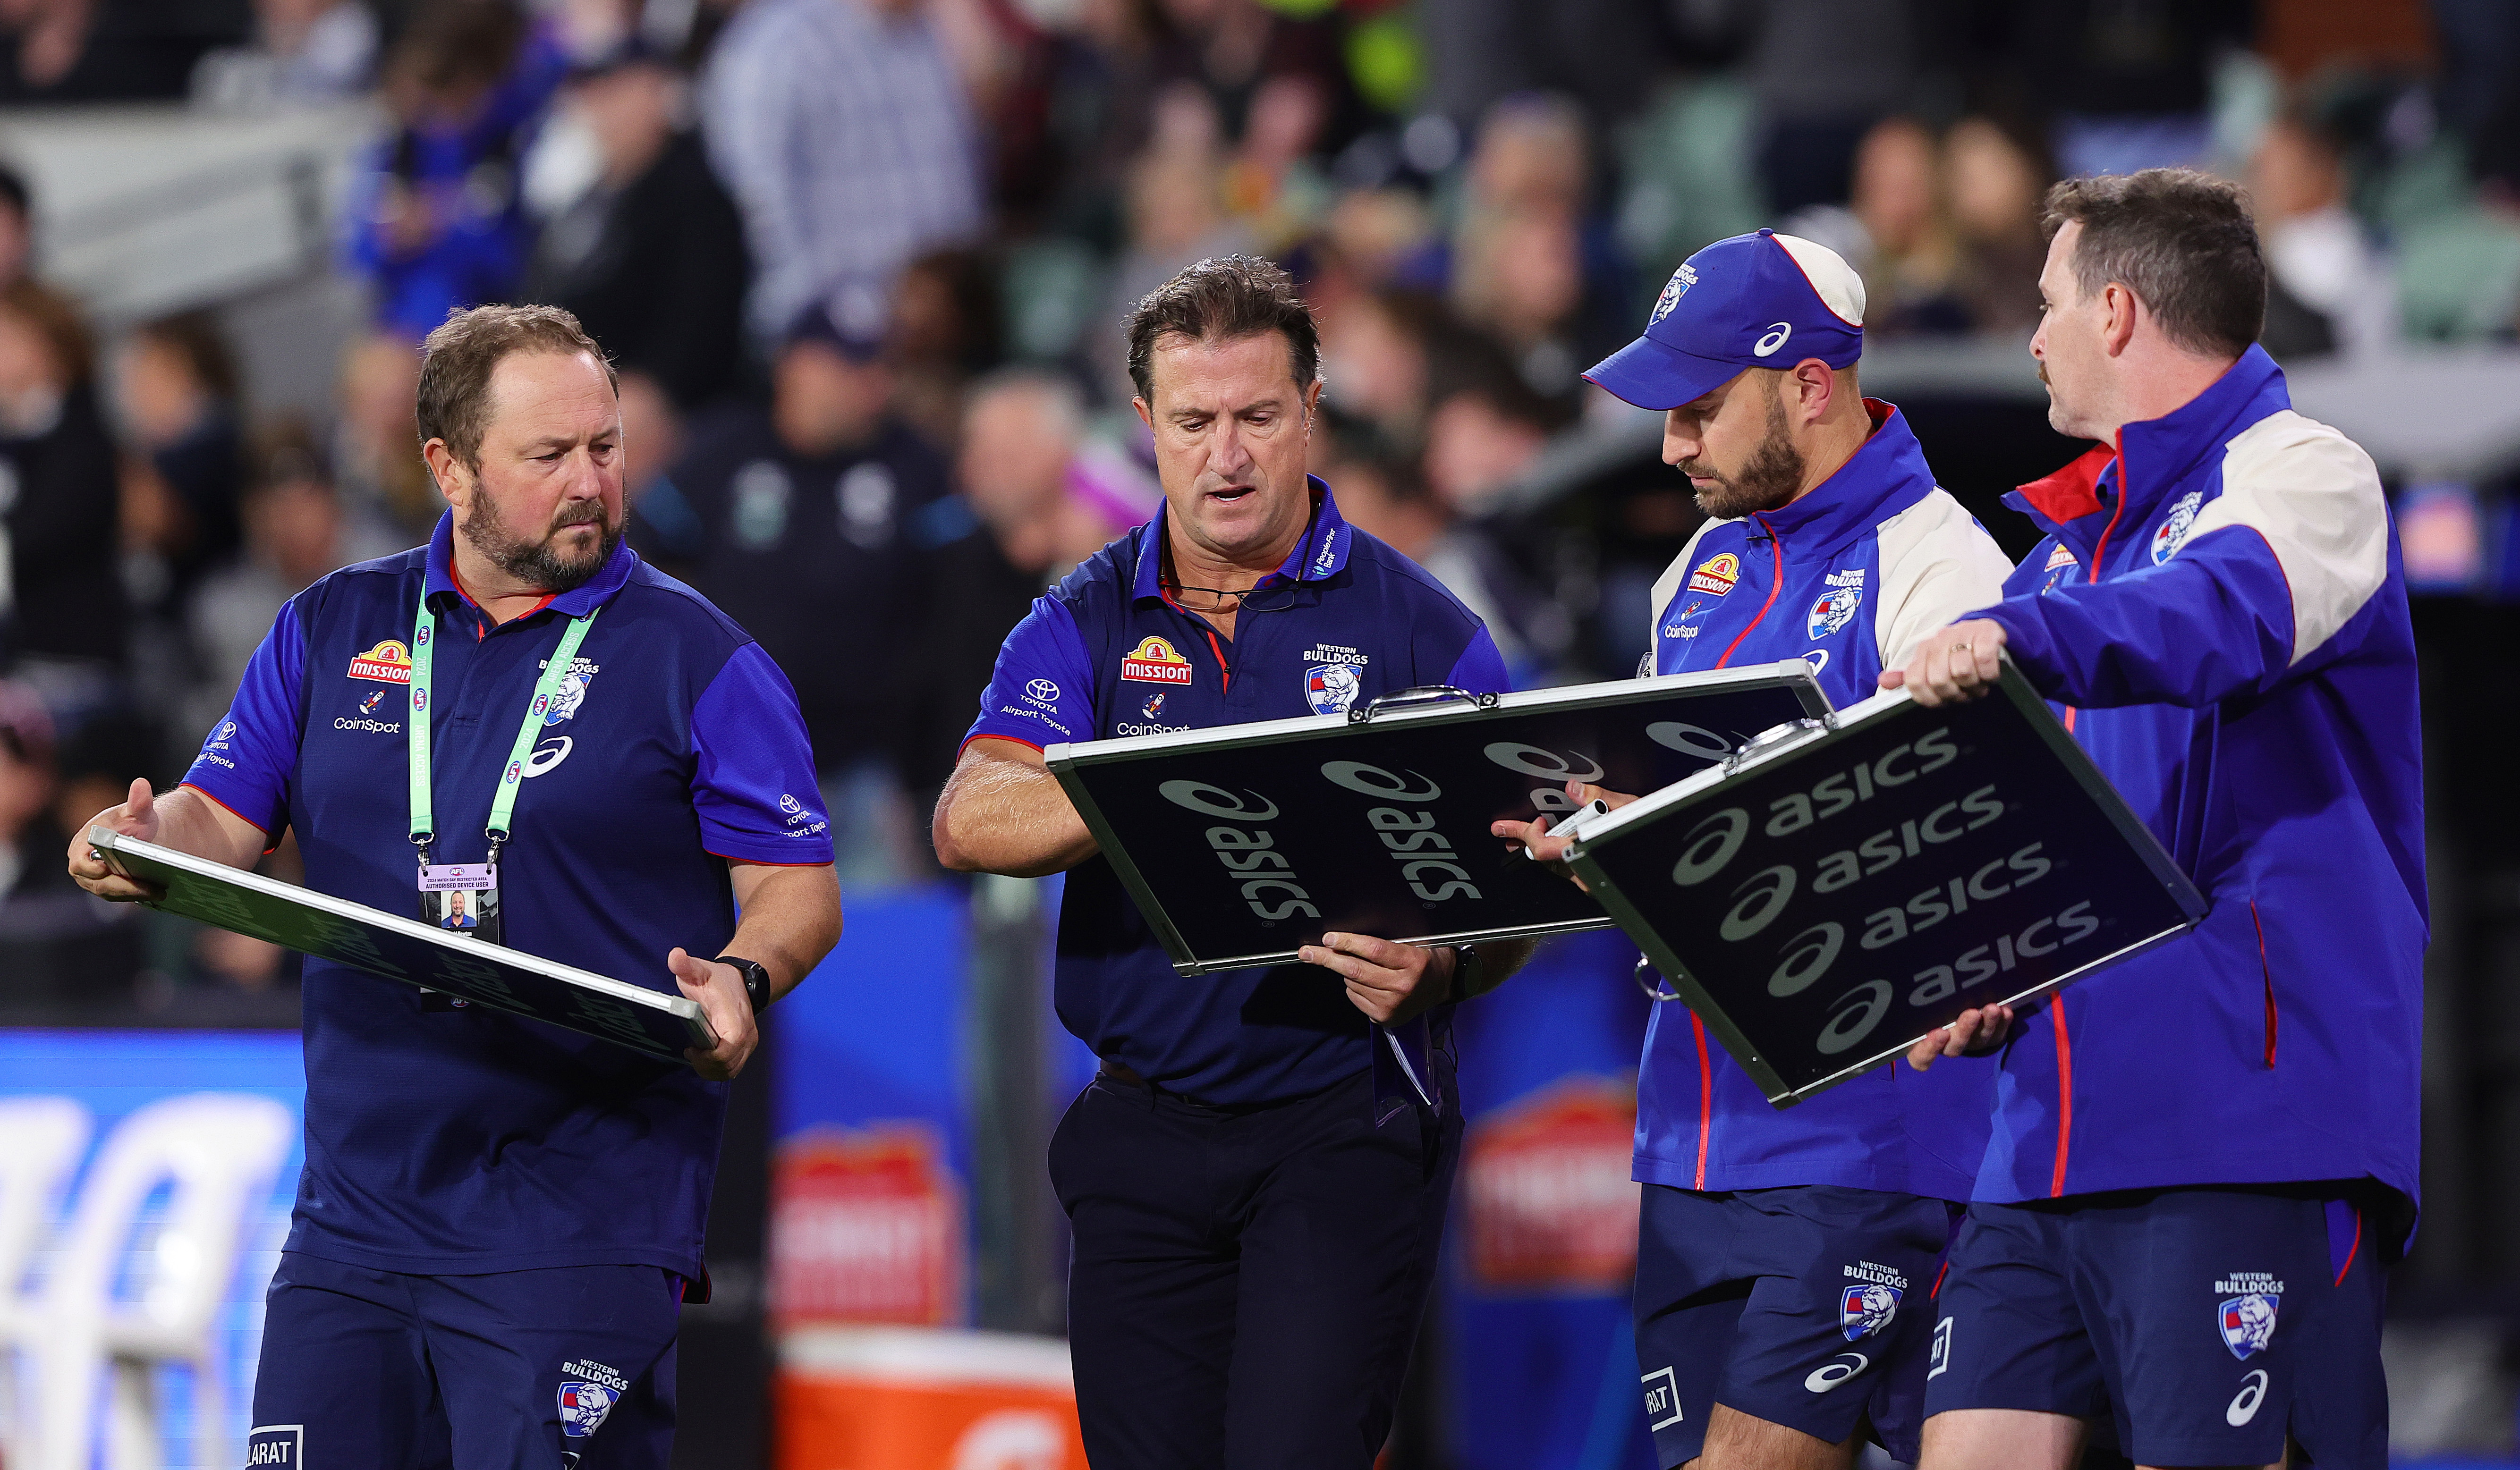 Luke Beveridge says he will move on from an interesting goal review call.